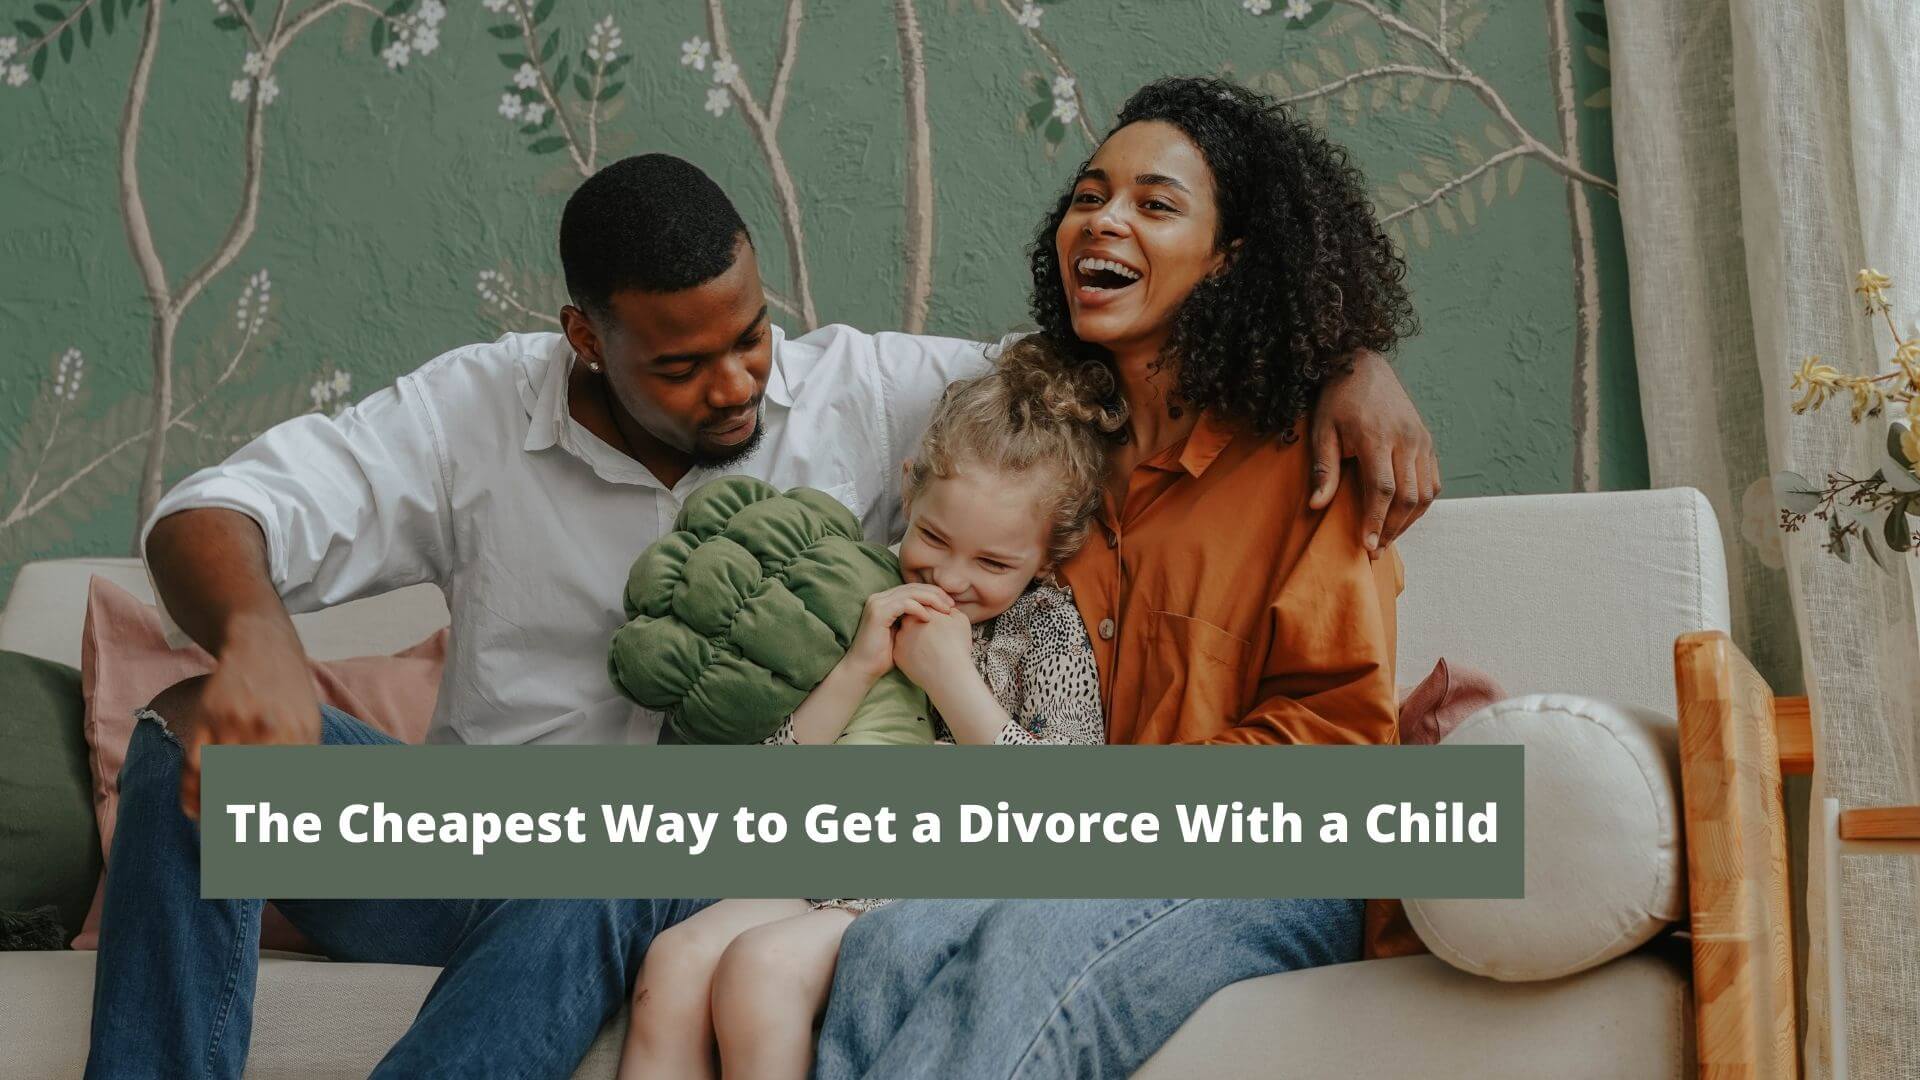 The Cheapest Way to Get a Divorce With a Child